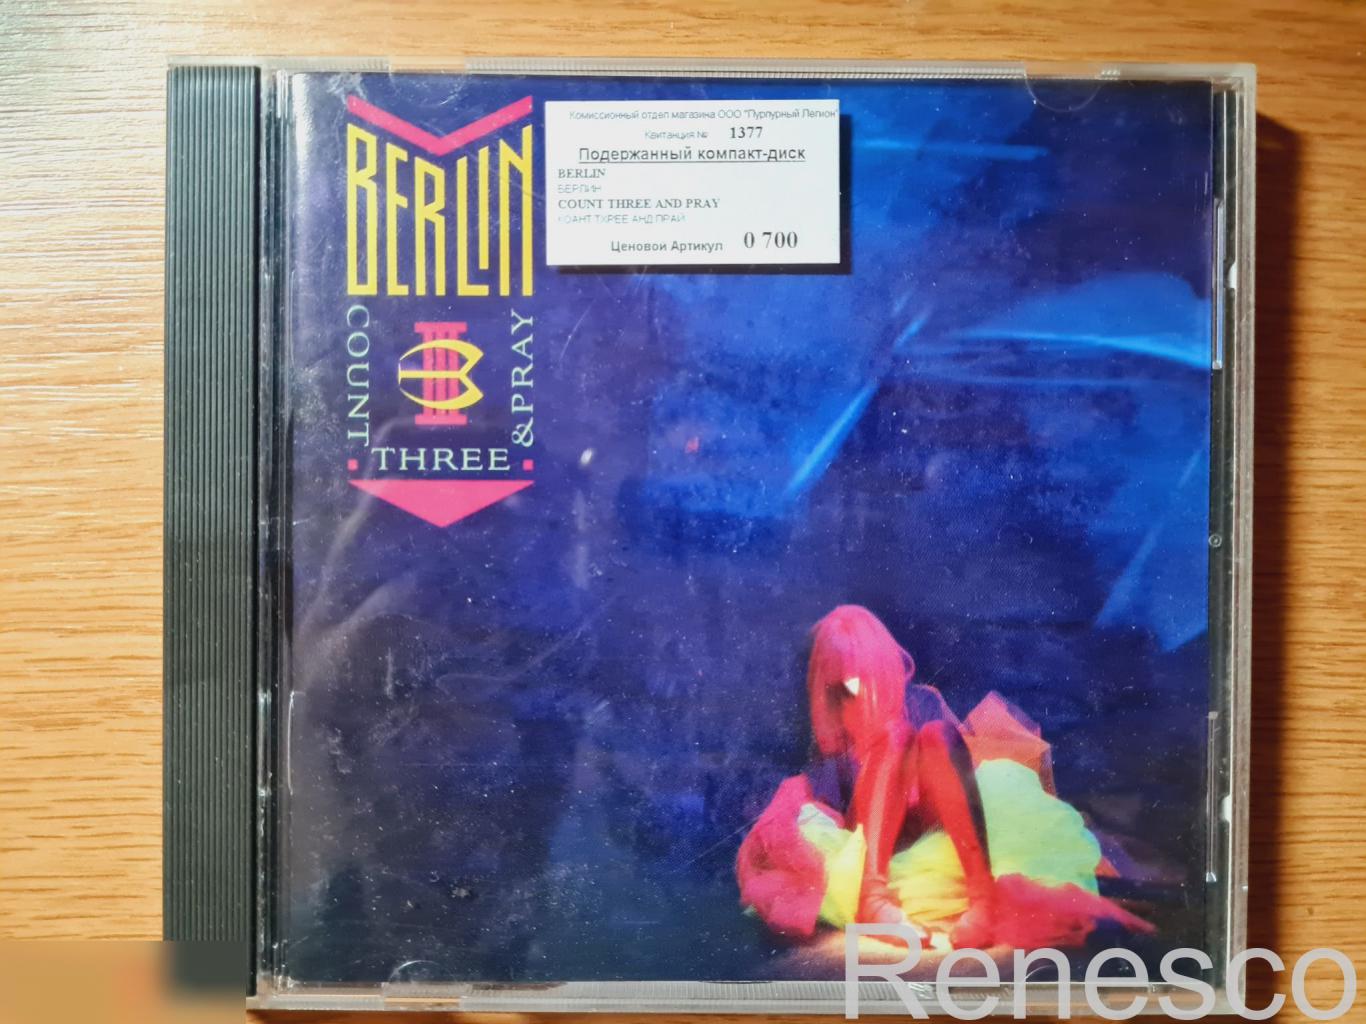 Berlin – Count Three And Pray (USA) (1997) (Reissue)